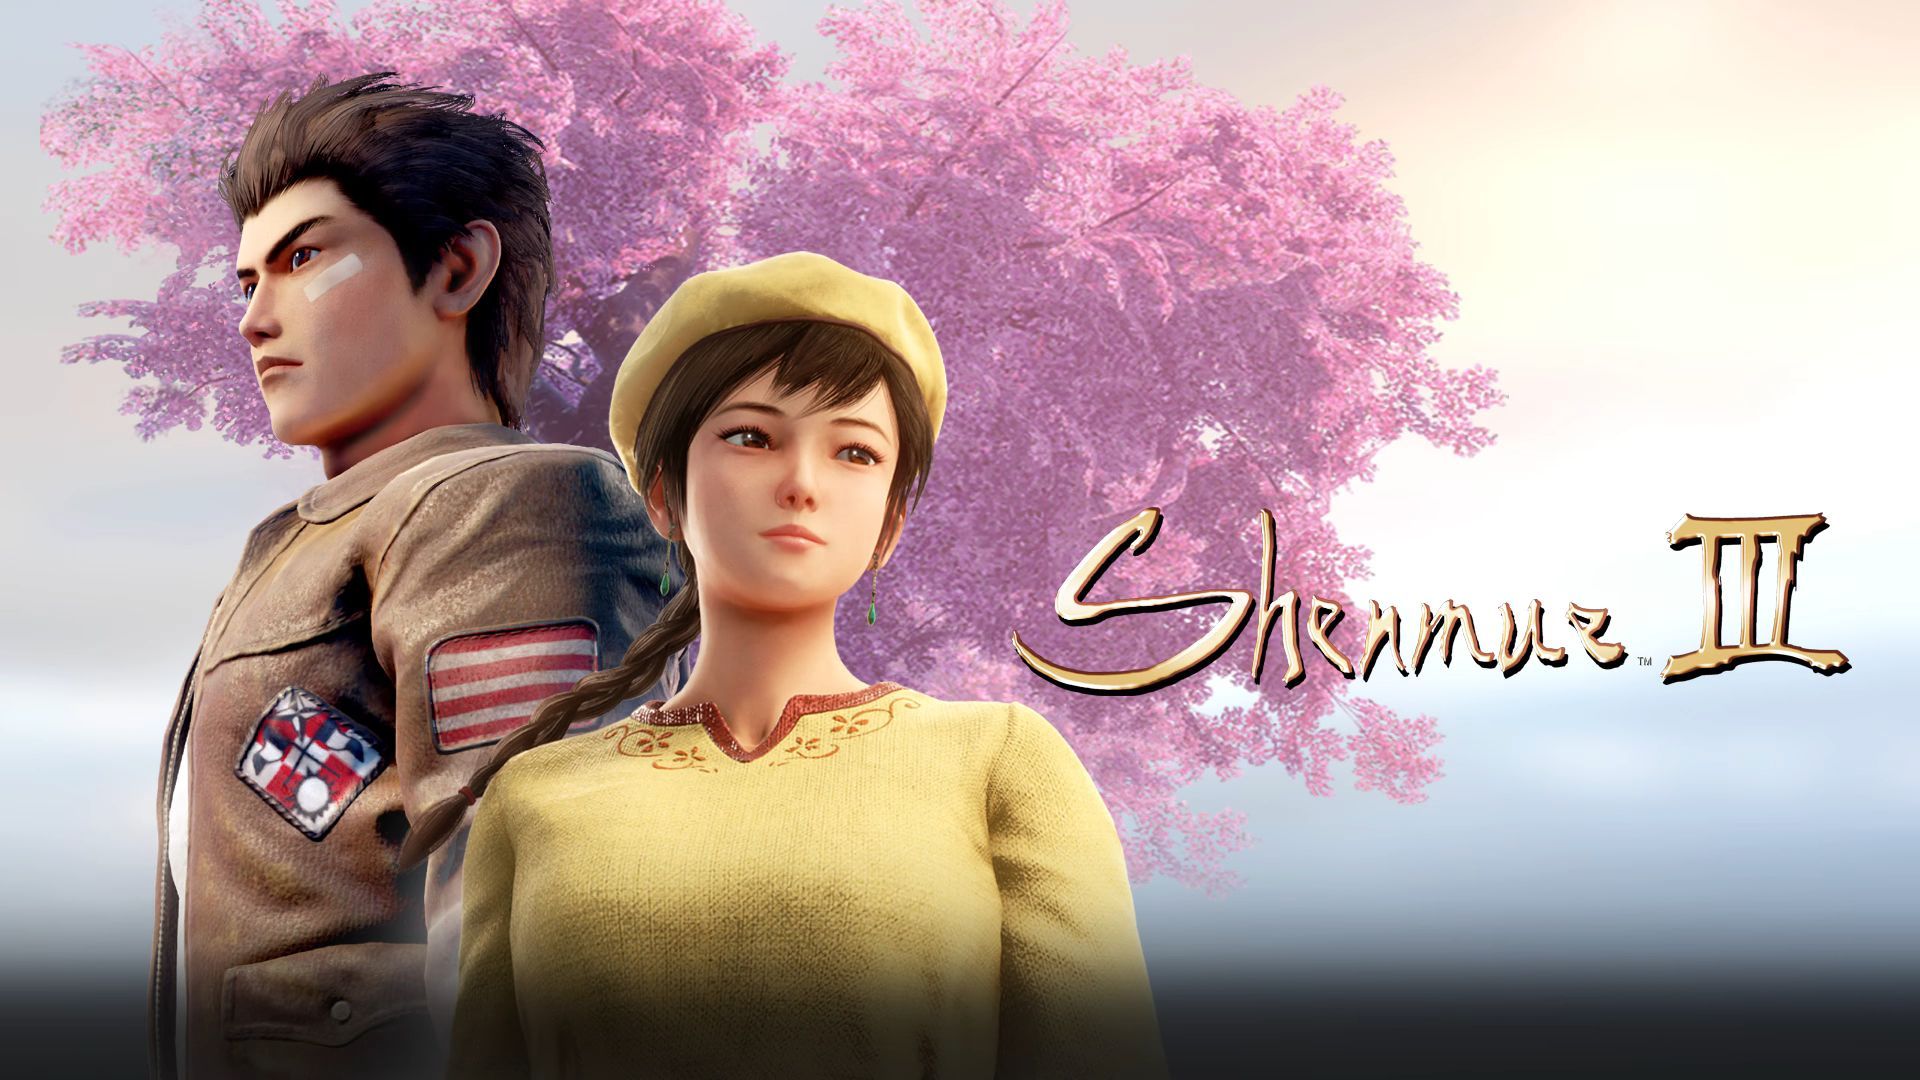 Shenmue Iii Gets Lots Of New Details And Image On Minigames